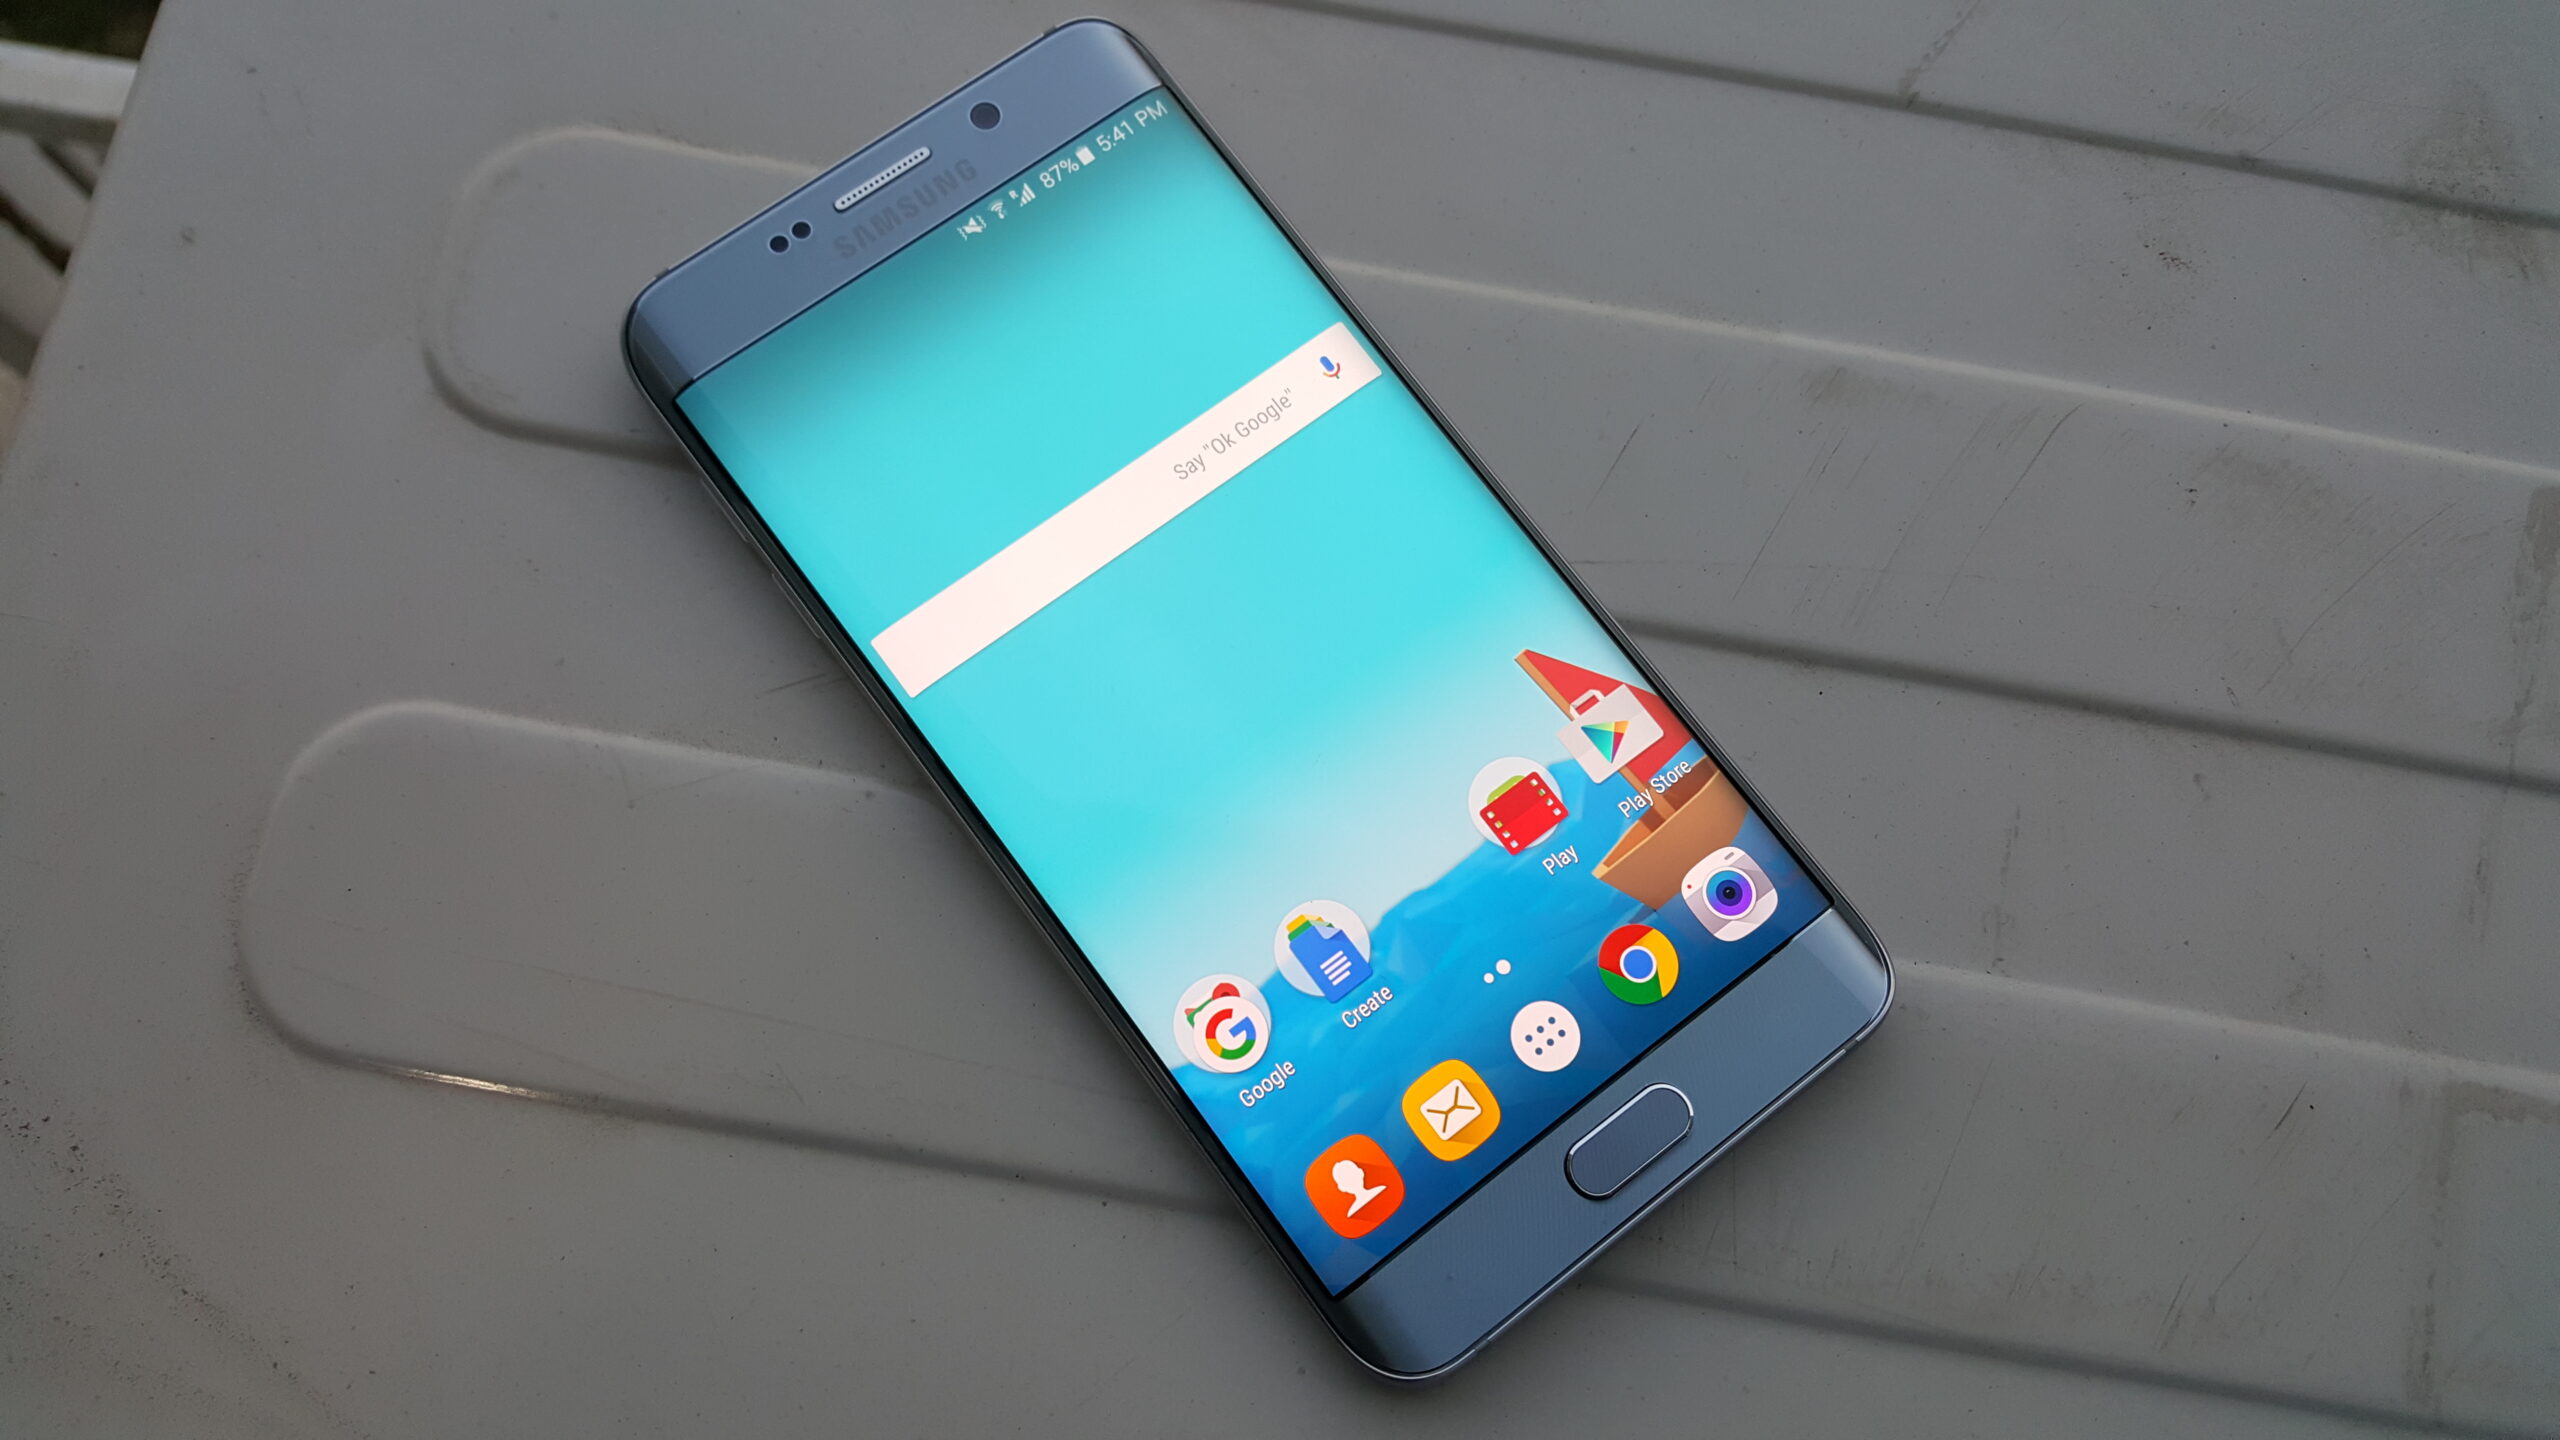 Galaxy S6 Google Now Launcher scaled